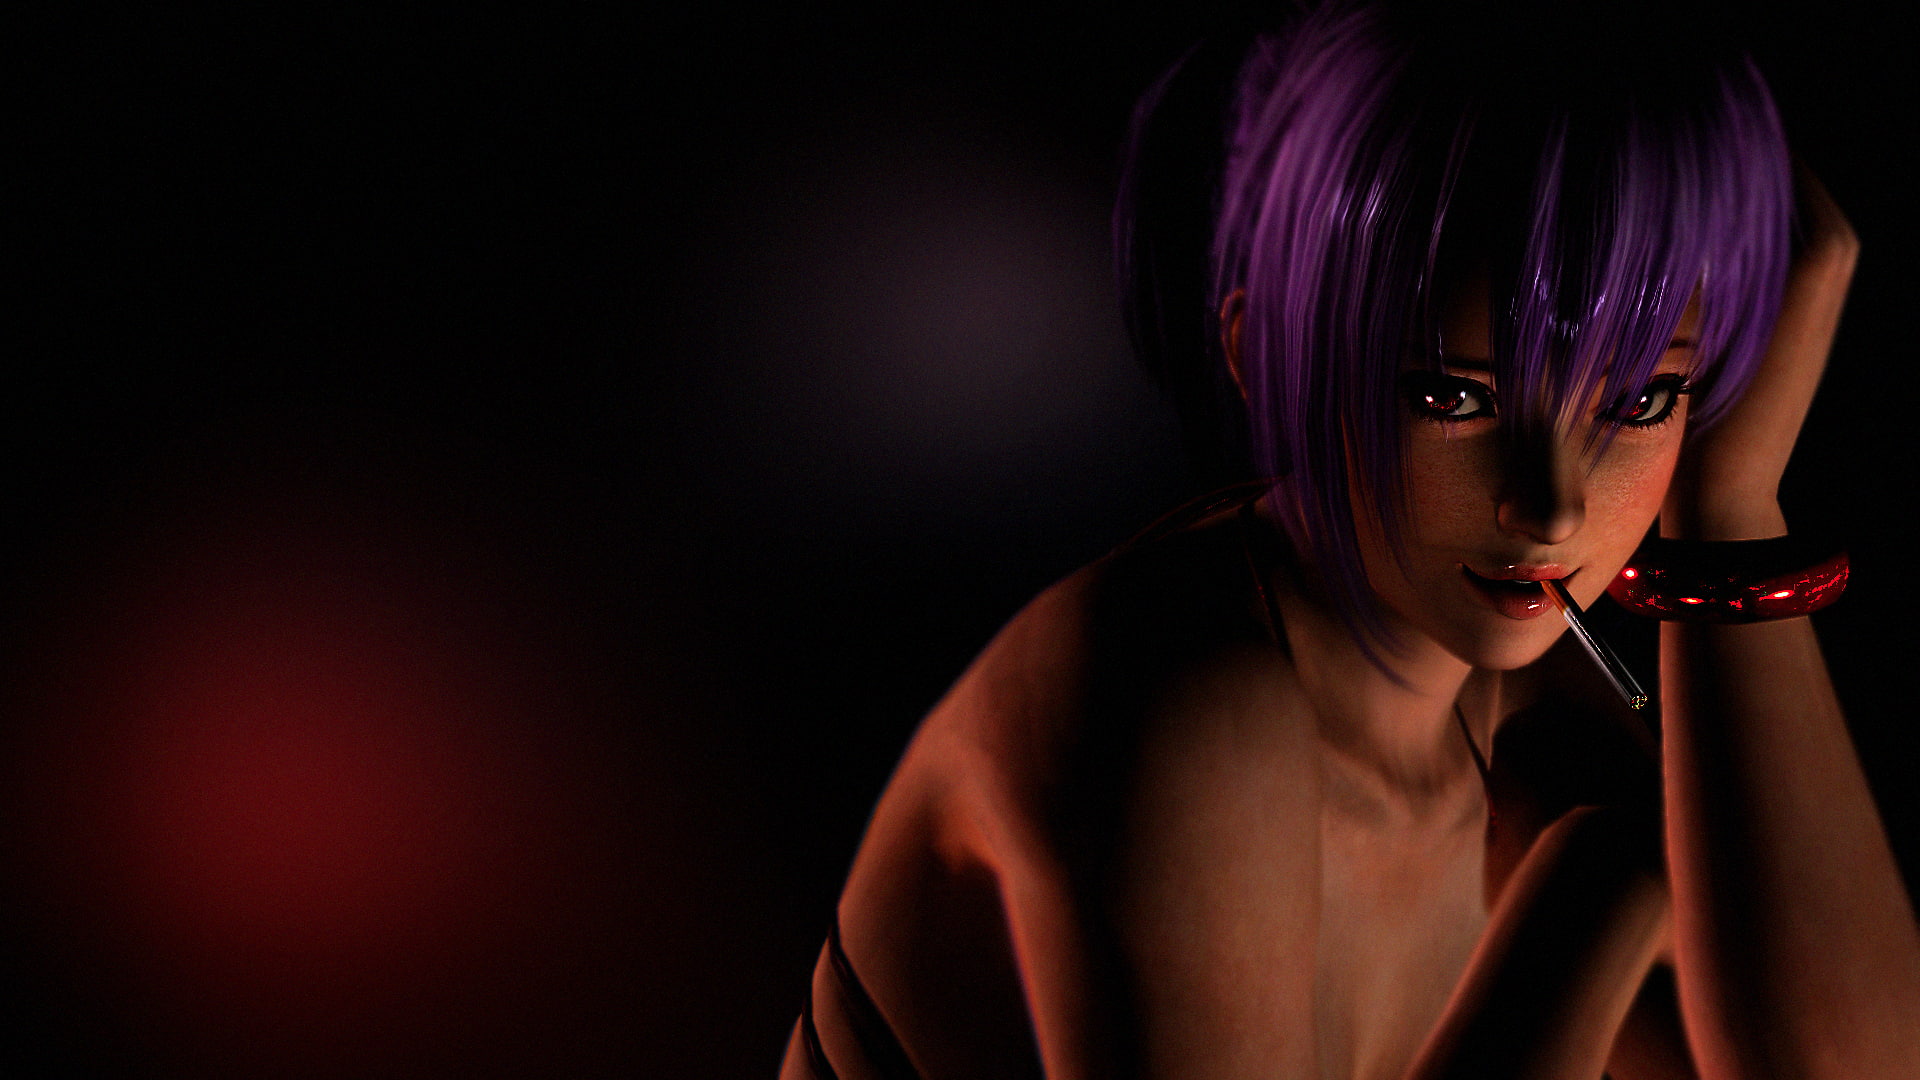 Dead or Alive, doa, ayane (doa), portrait, one person, young adult